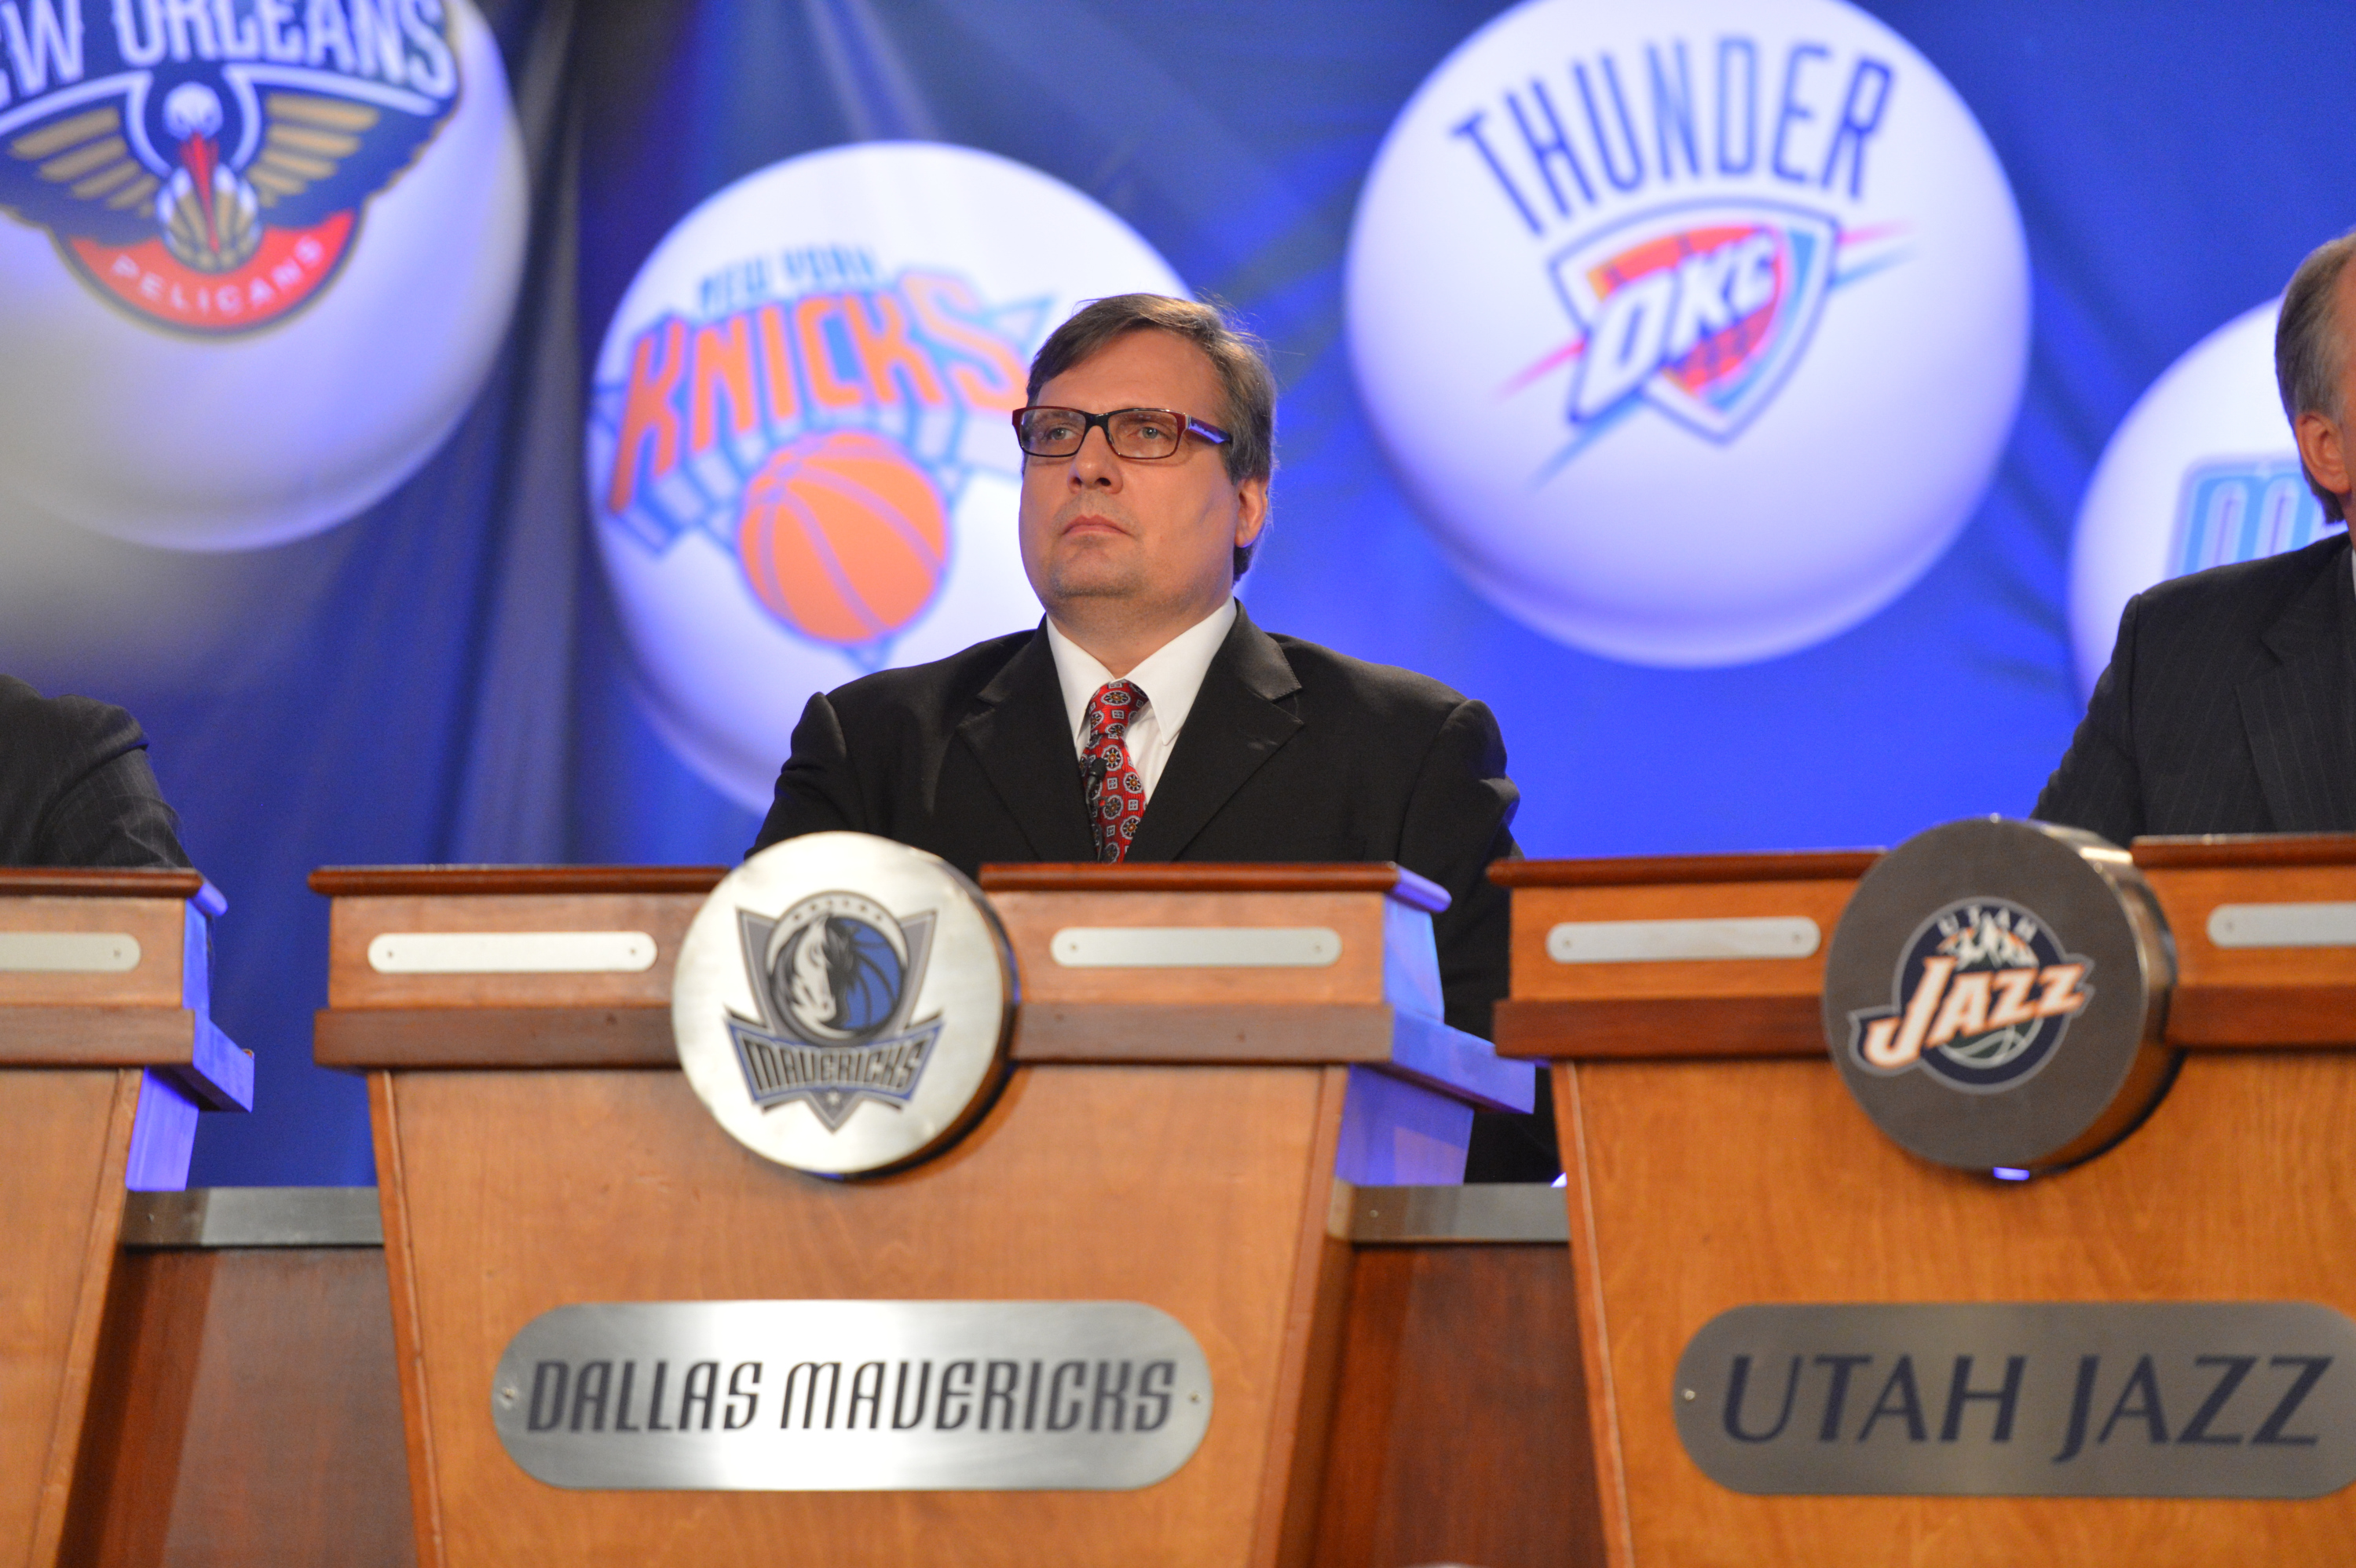 Mavericks Accuse Former GM Donnie Nelson of Extorting Up To $100M in Lawsuit Response